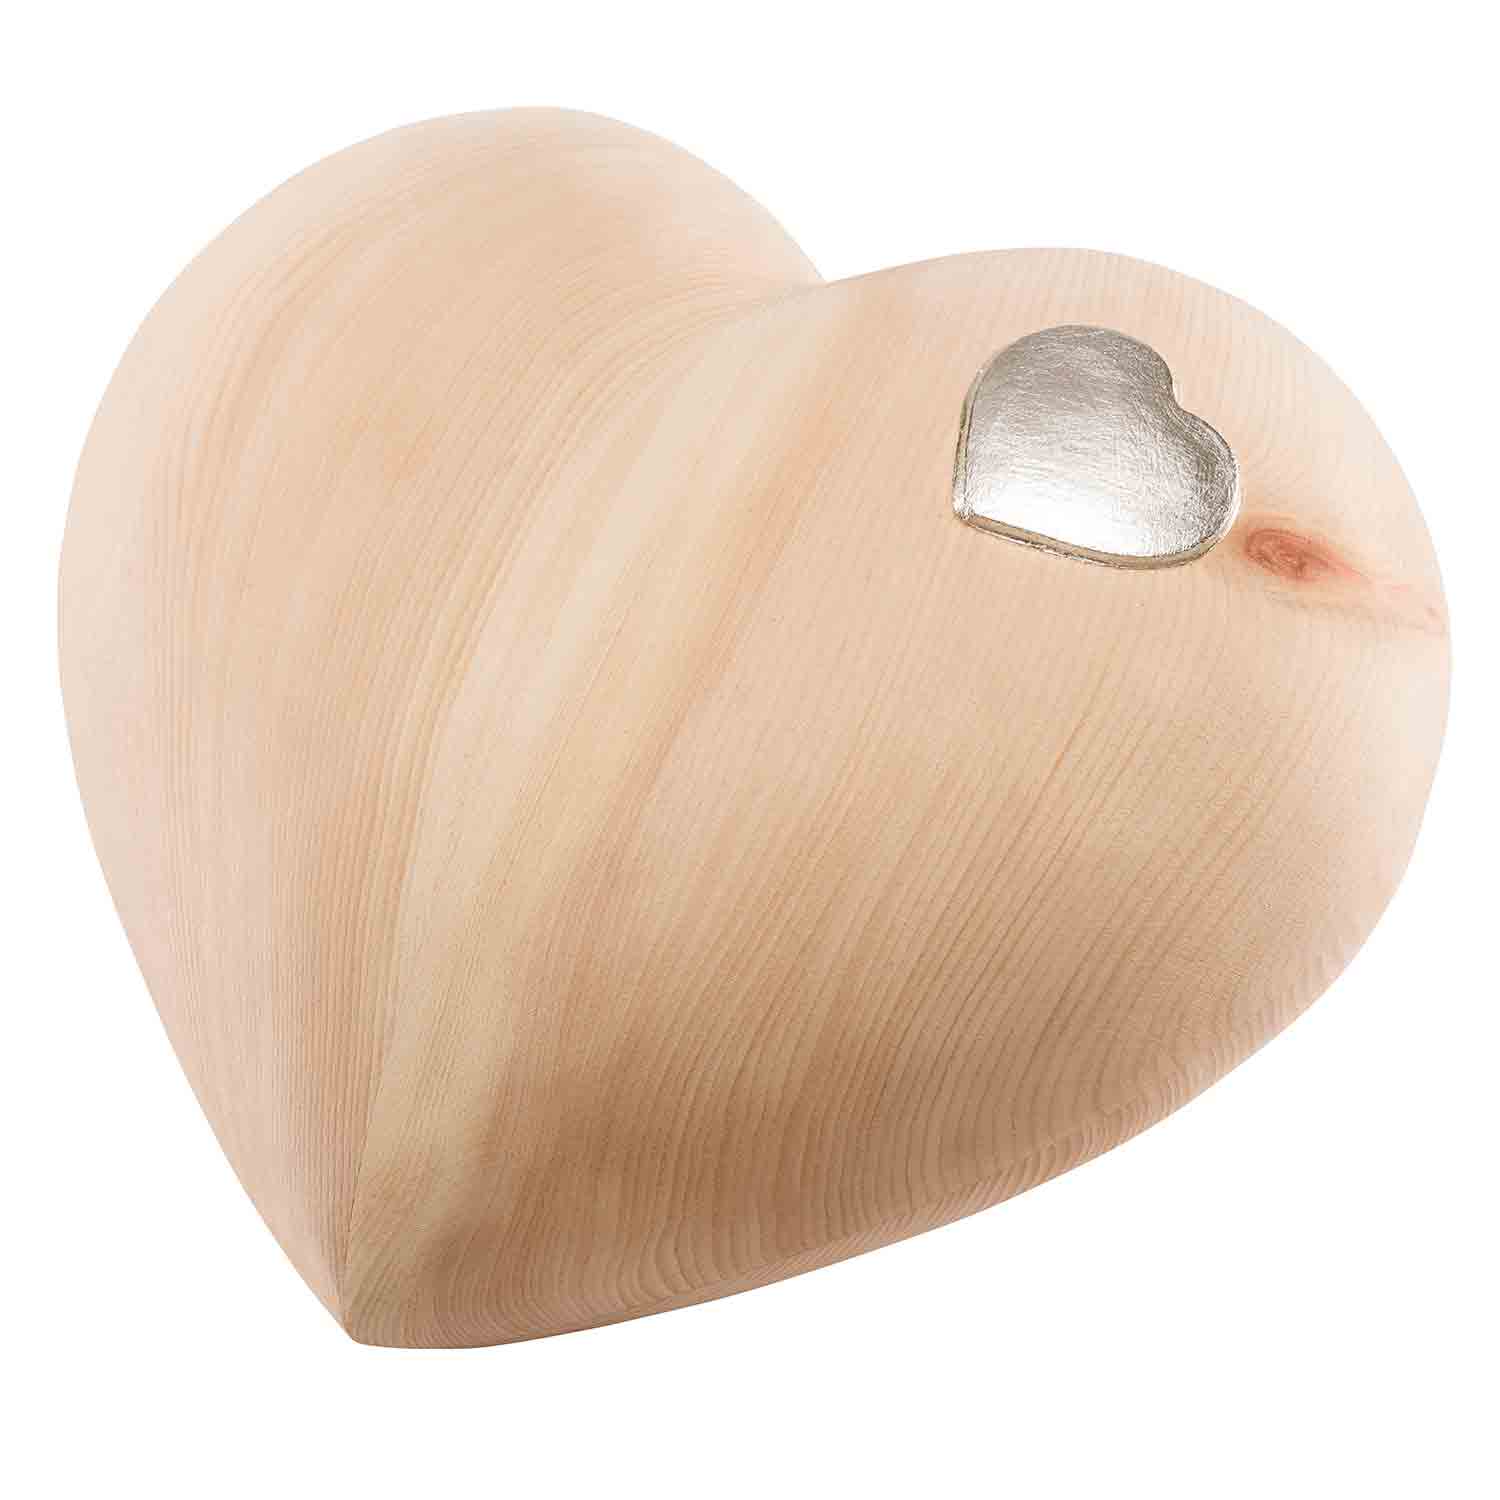 Heart Cremation Urn for Ashes Adult in Swiss Pine Wood with Silver Heart